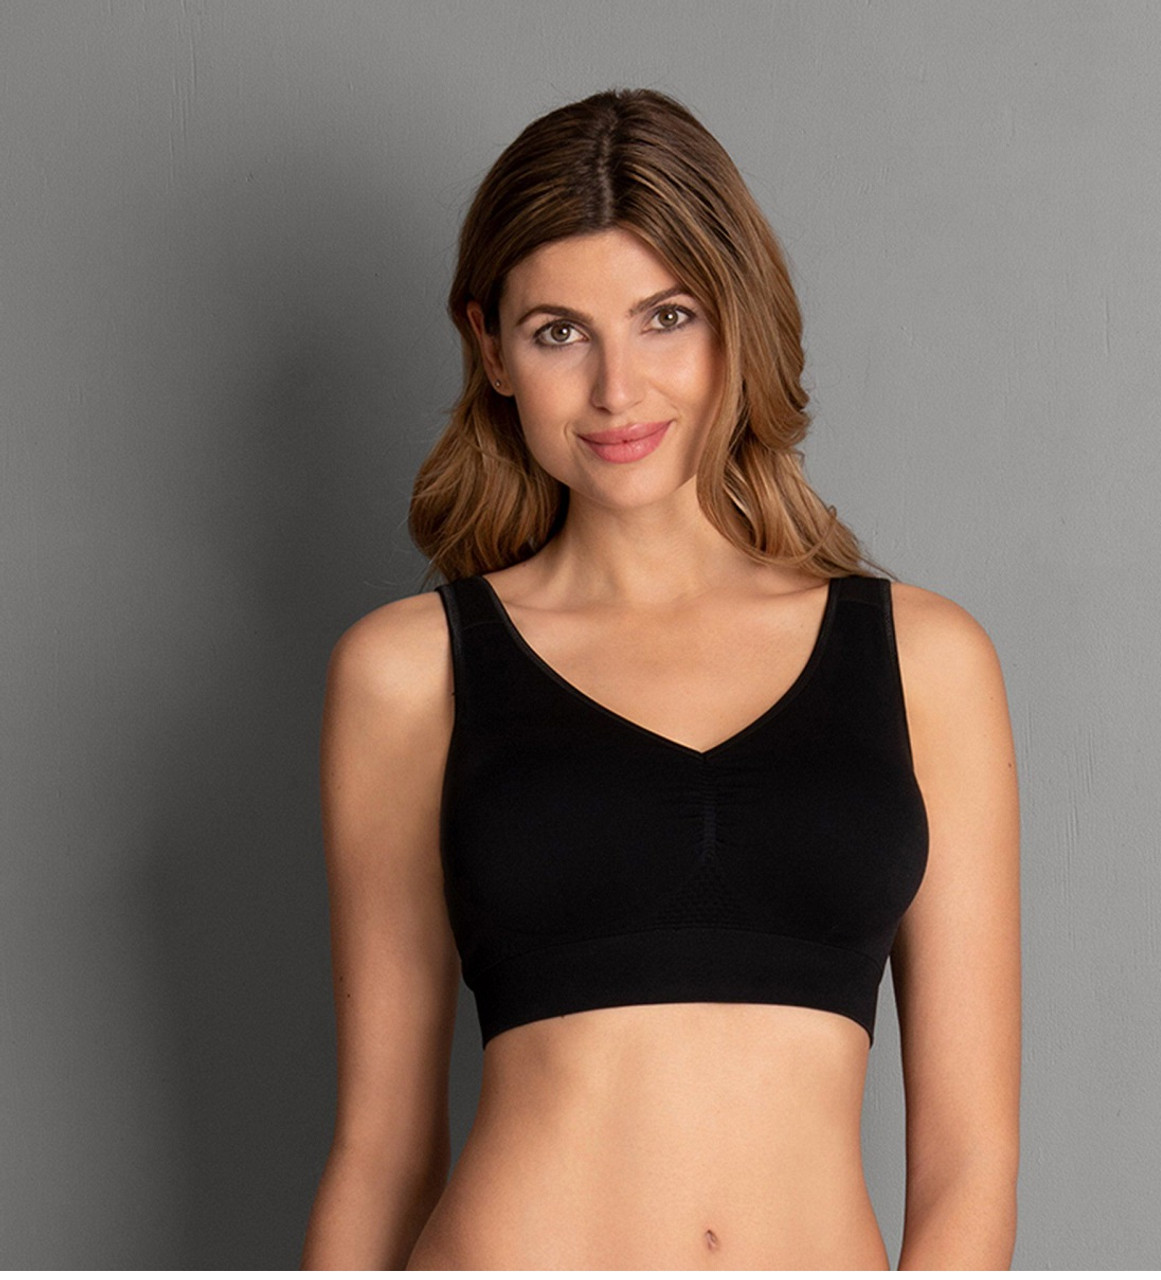 Post Mastectomy Sport Bra by Classique Style -711 is available at GraceMd